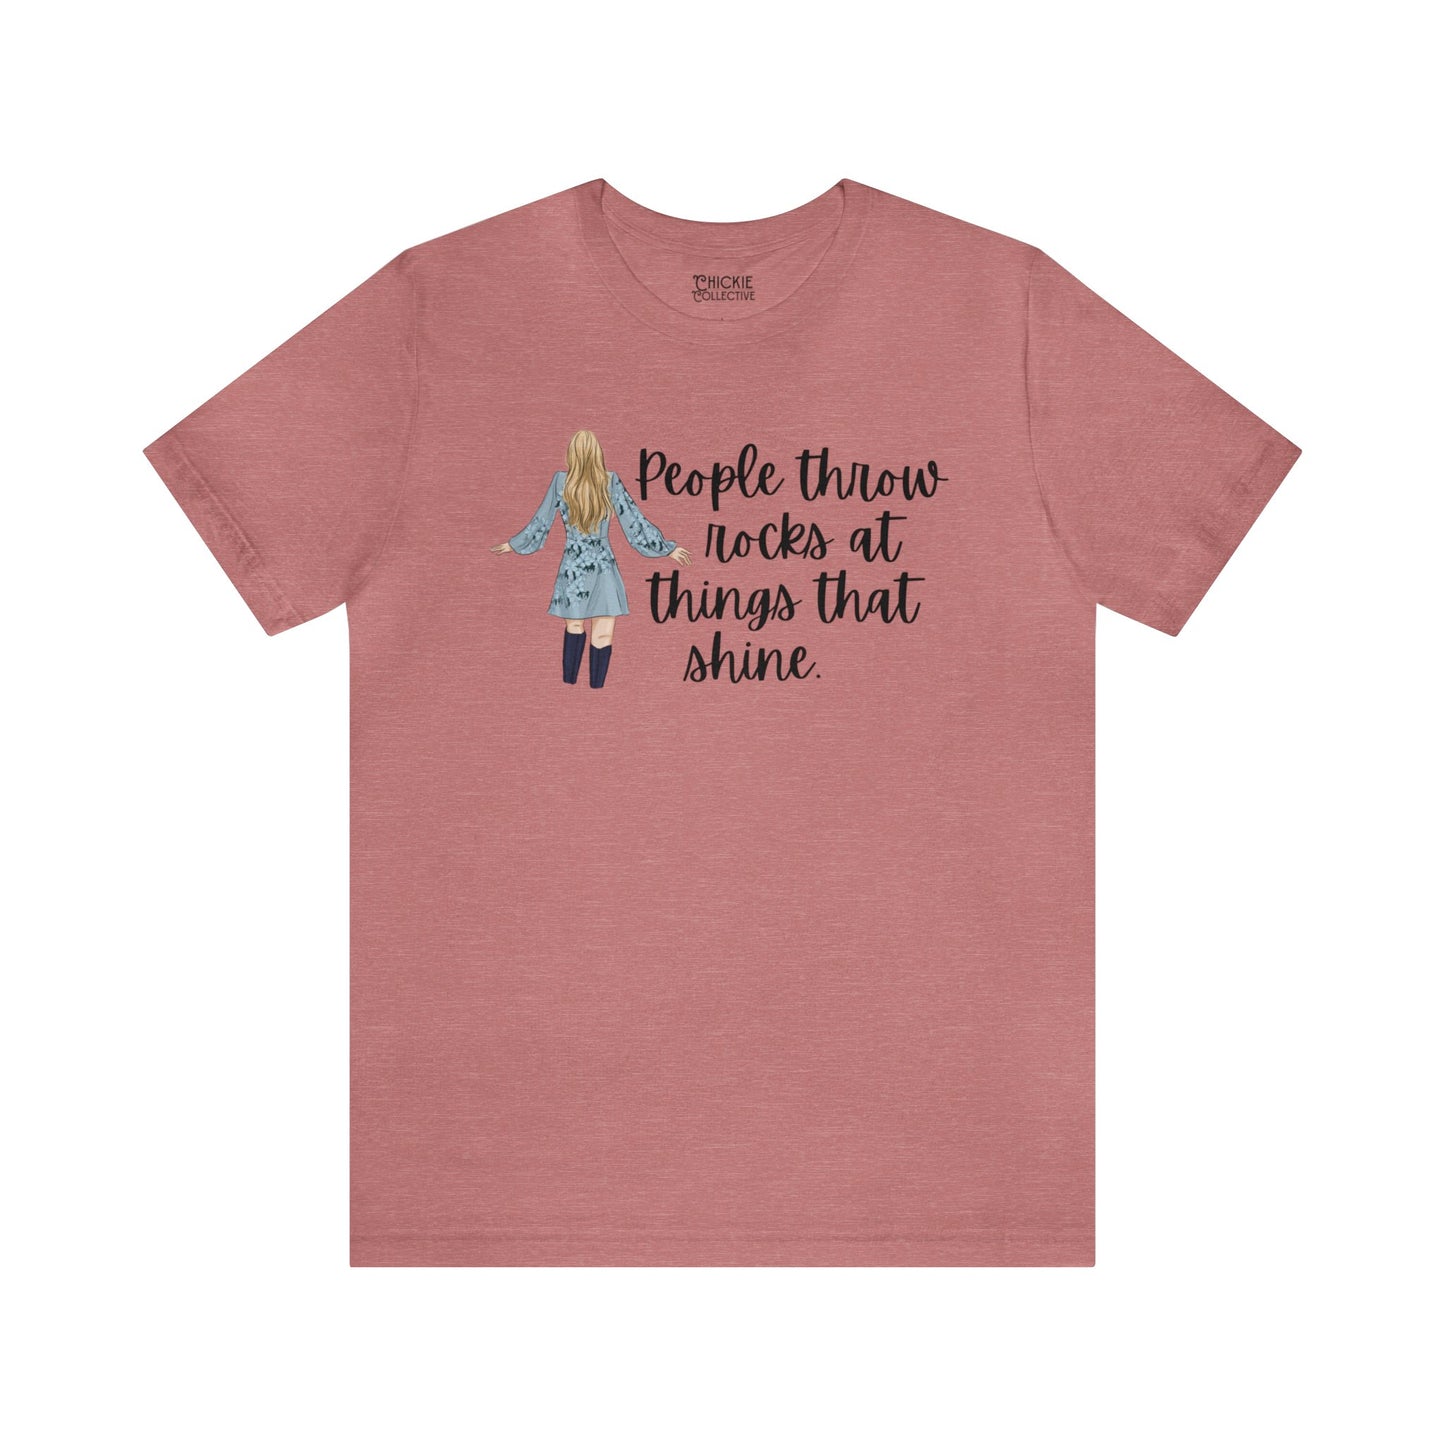 Taylor Swift Preppy Picture T-Shirt - People Throw Rocks at Things That Shine